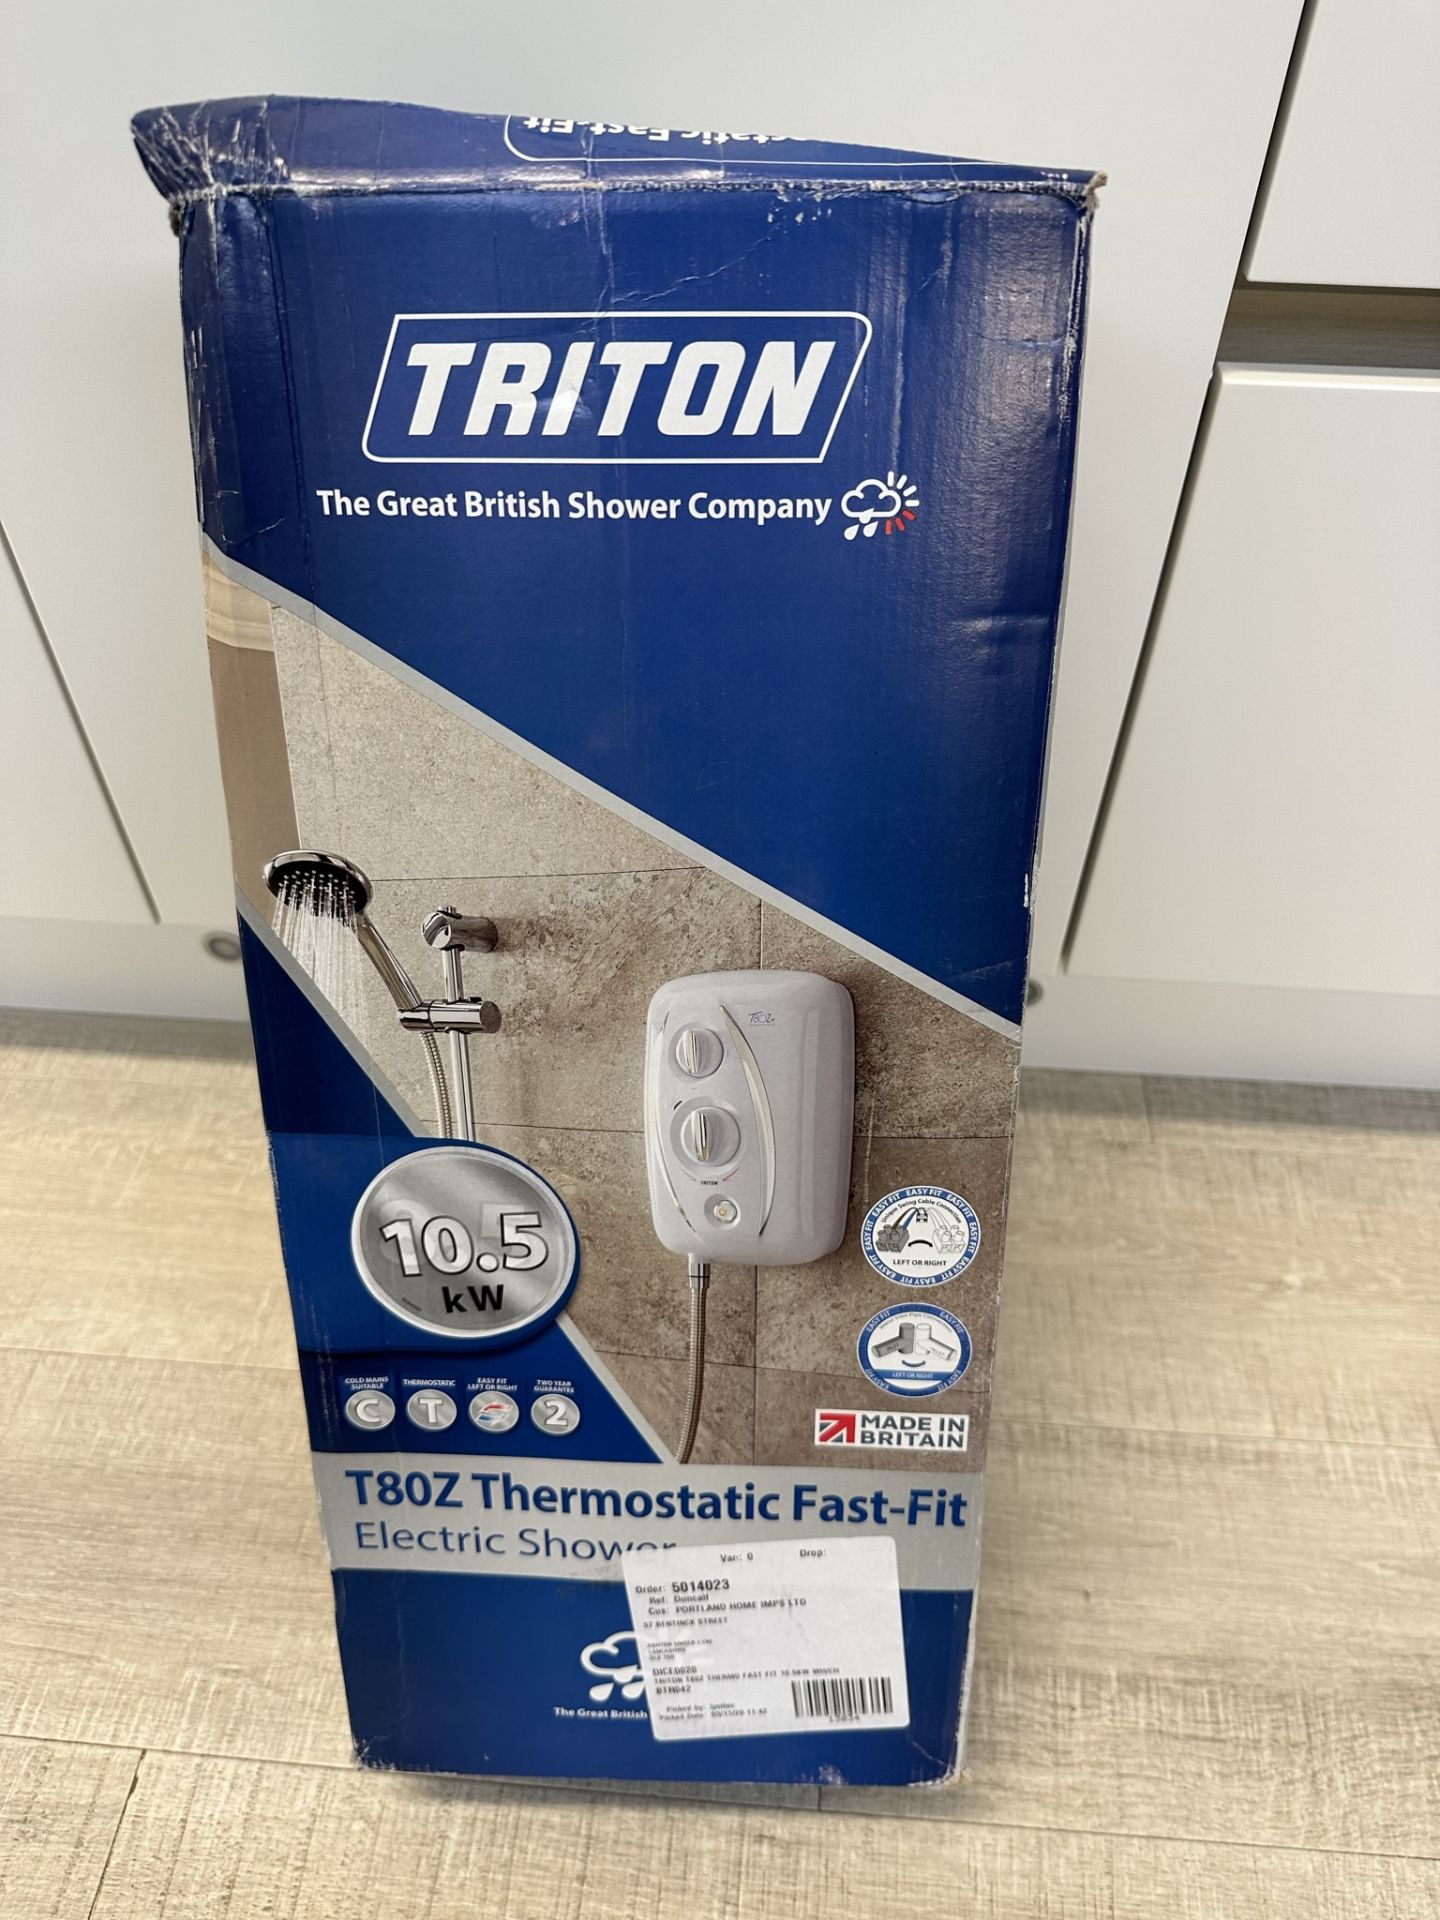 Triton T80Z Thermostatic Fast-Fit Electric Shower Kit